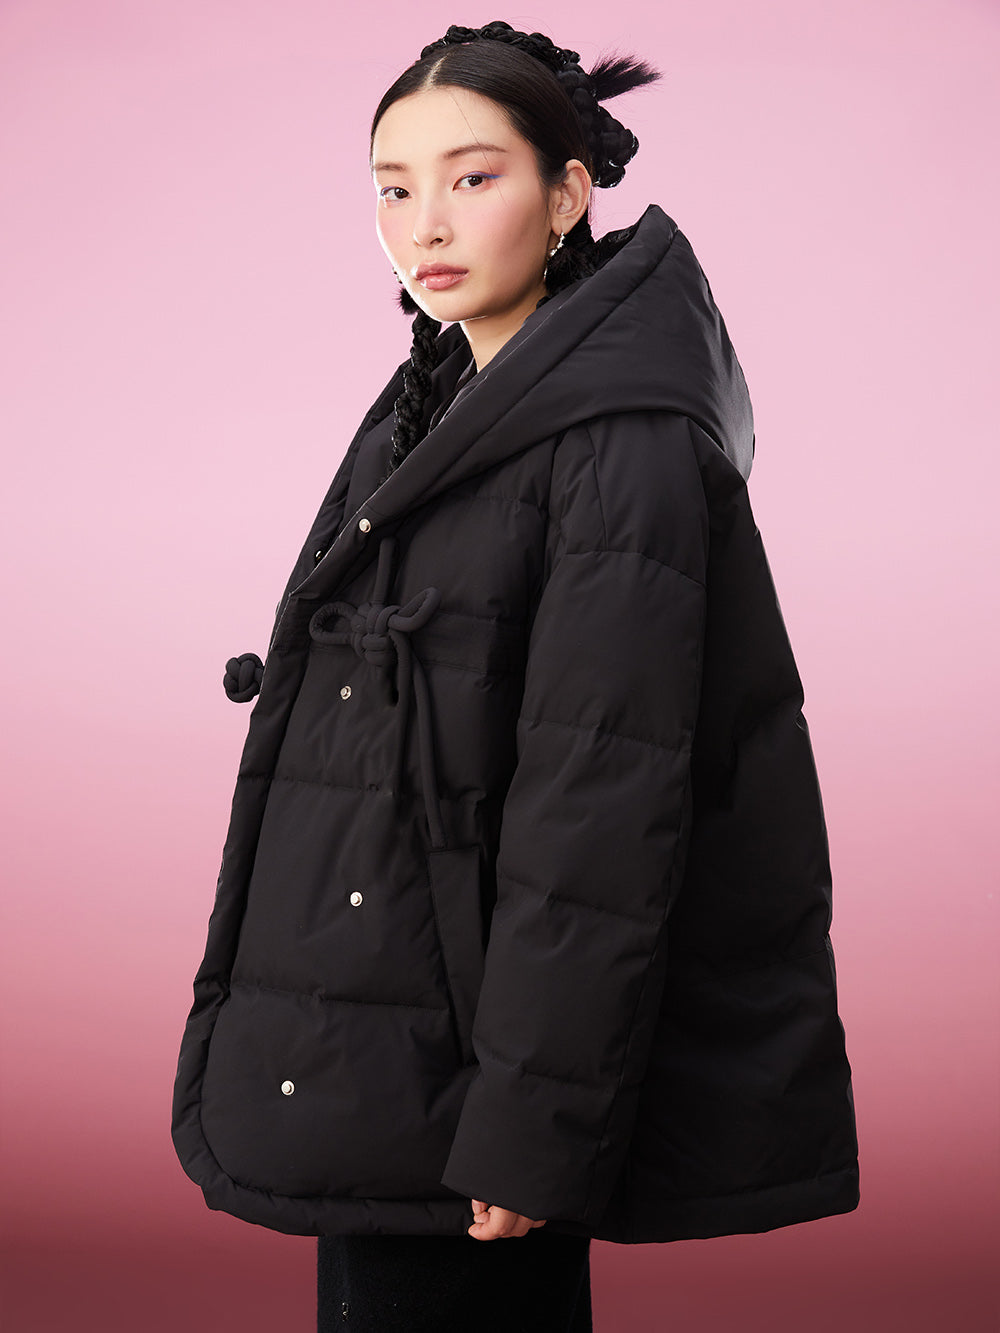 MUKZIN Proofing Fabric Neo-Chinese Goose Down Jacket